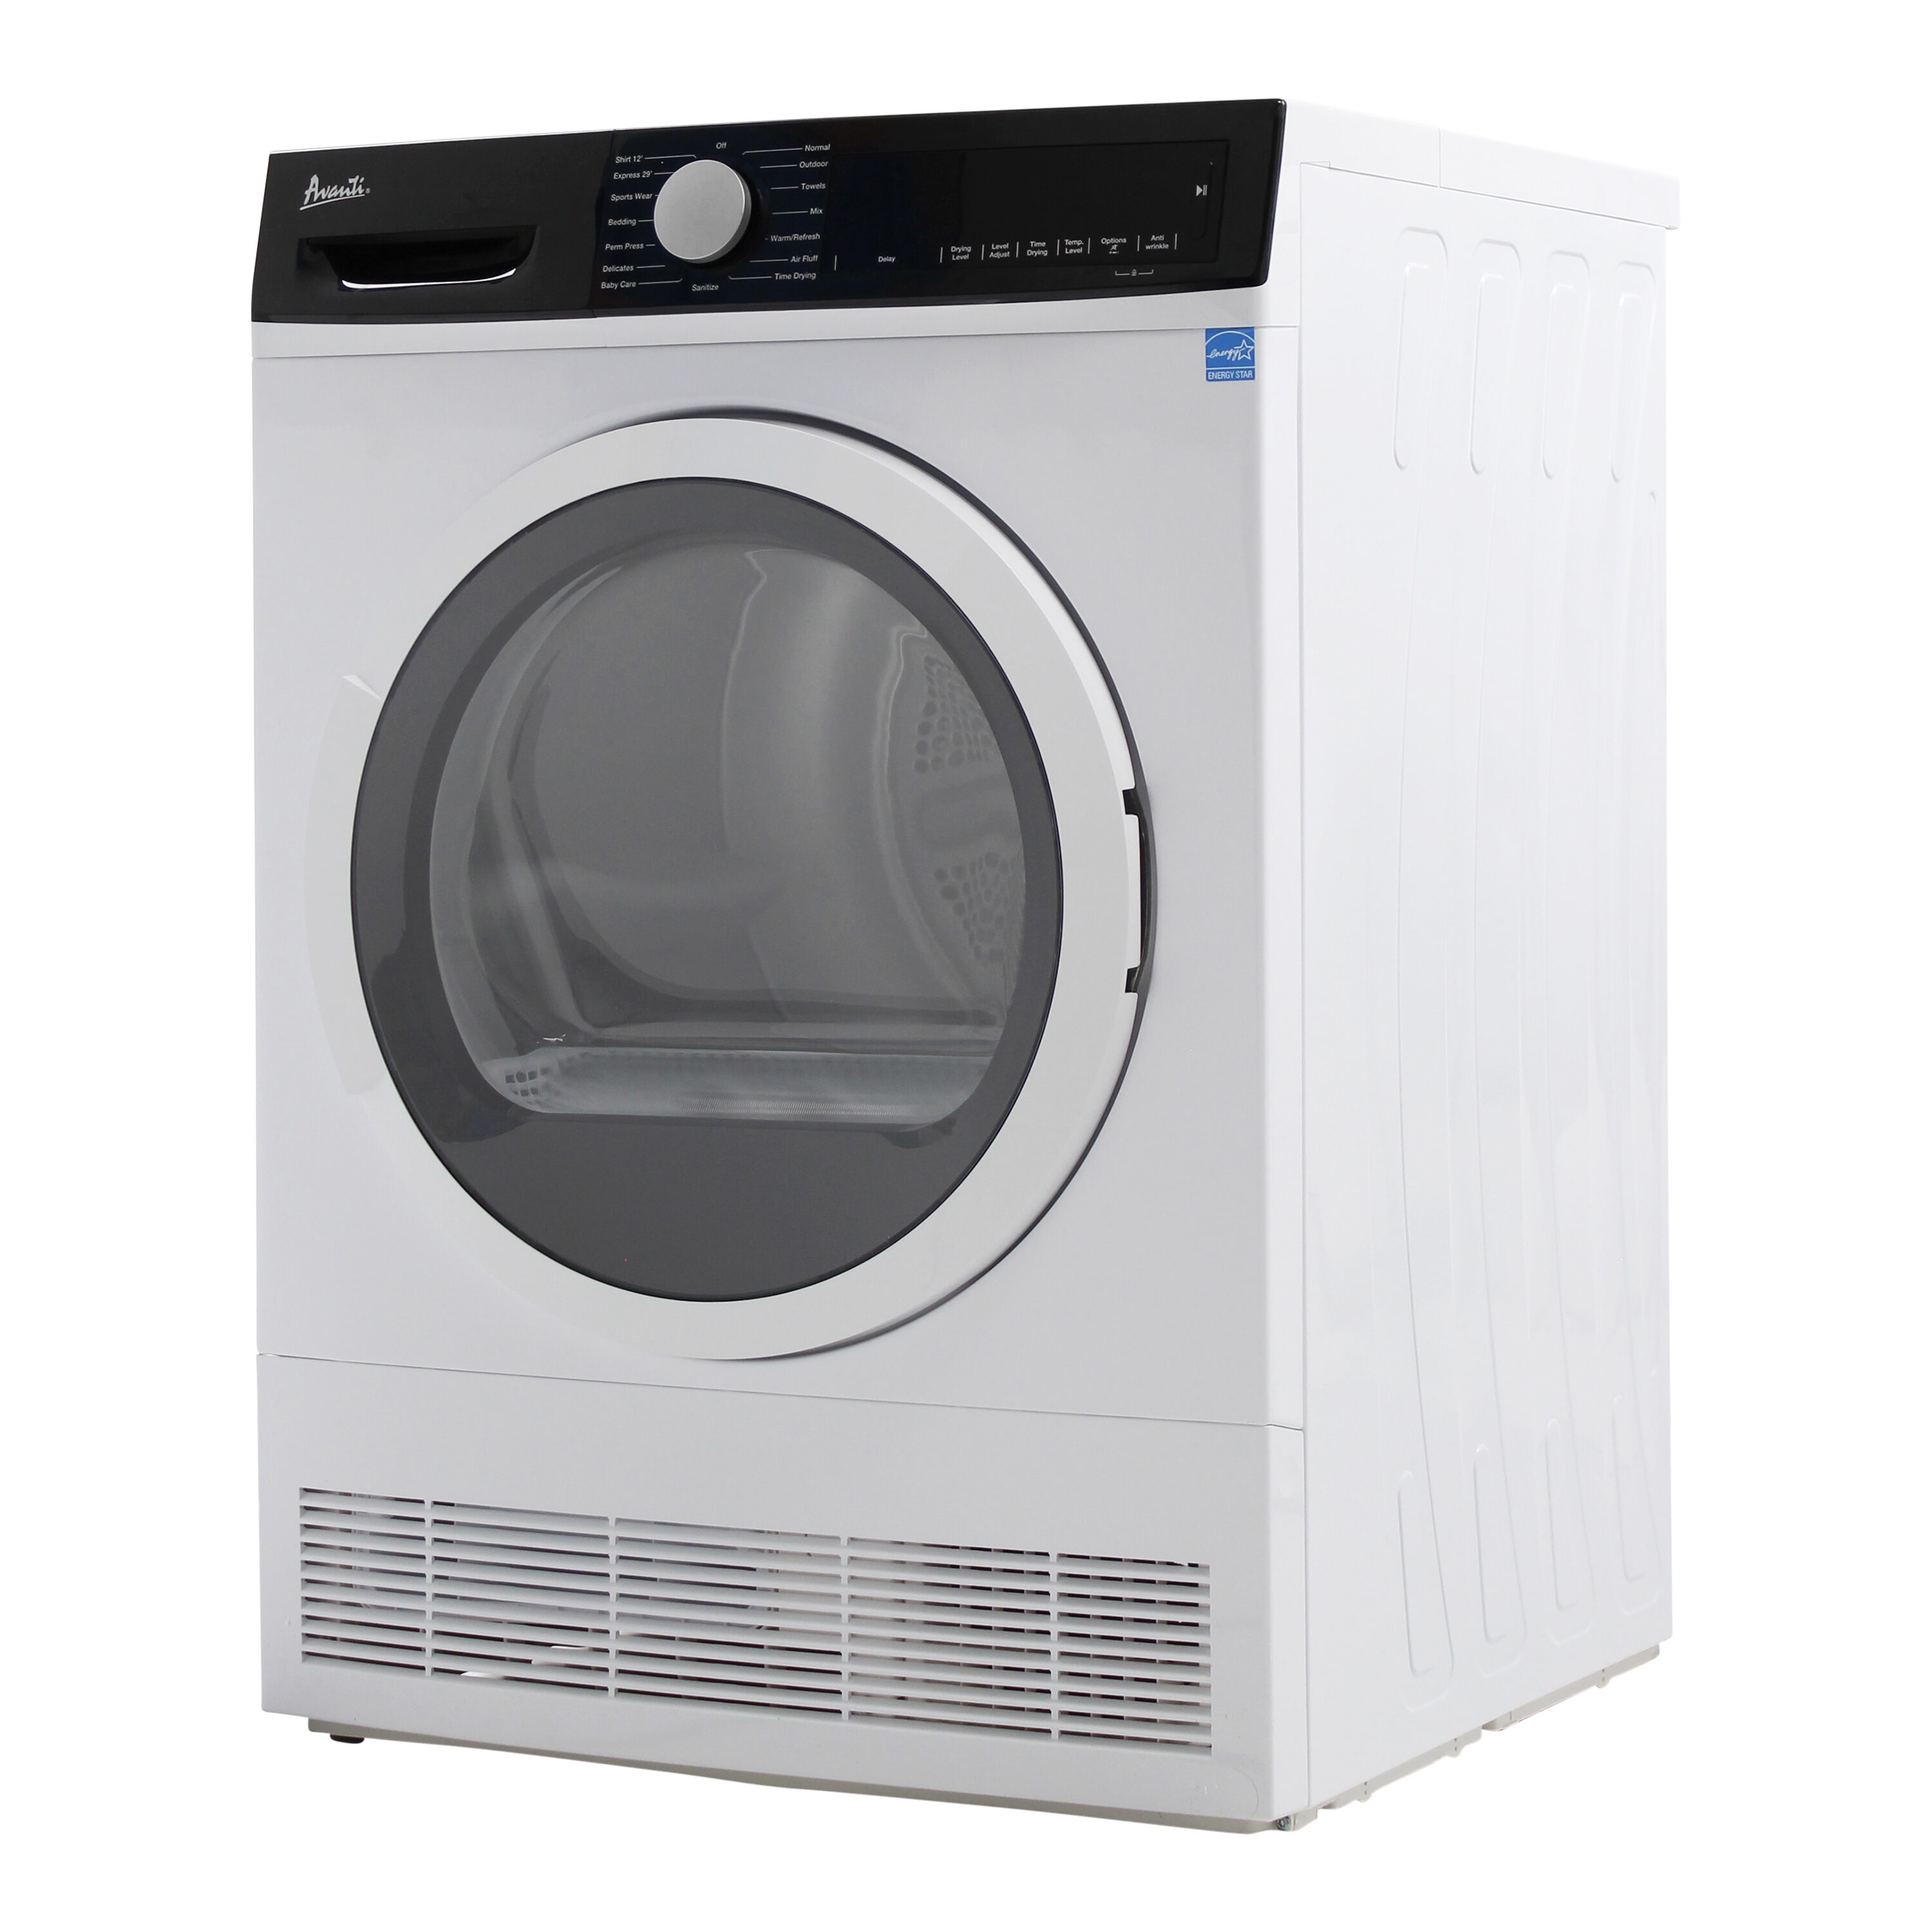 MAGIC CLEAN 2.6 cu. ft. Ventless Compact Electric Dryer in White